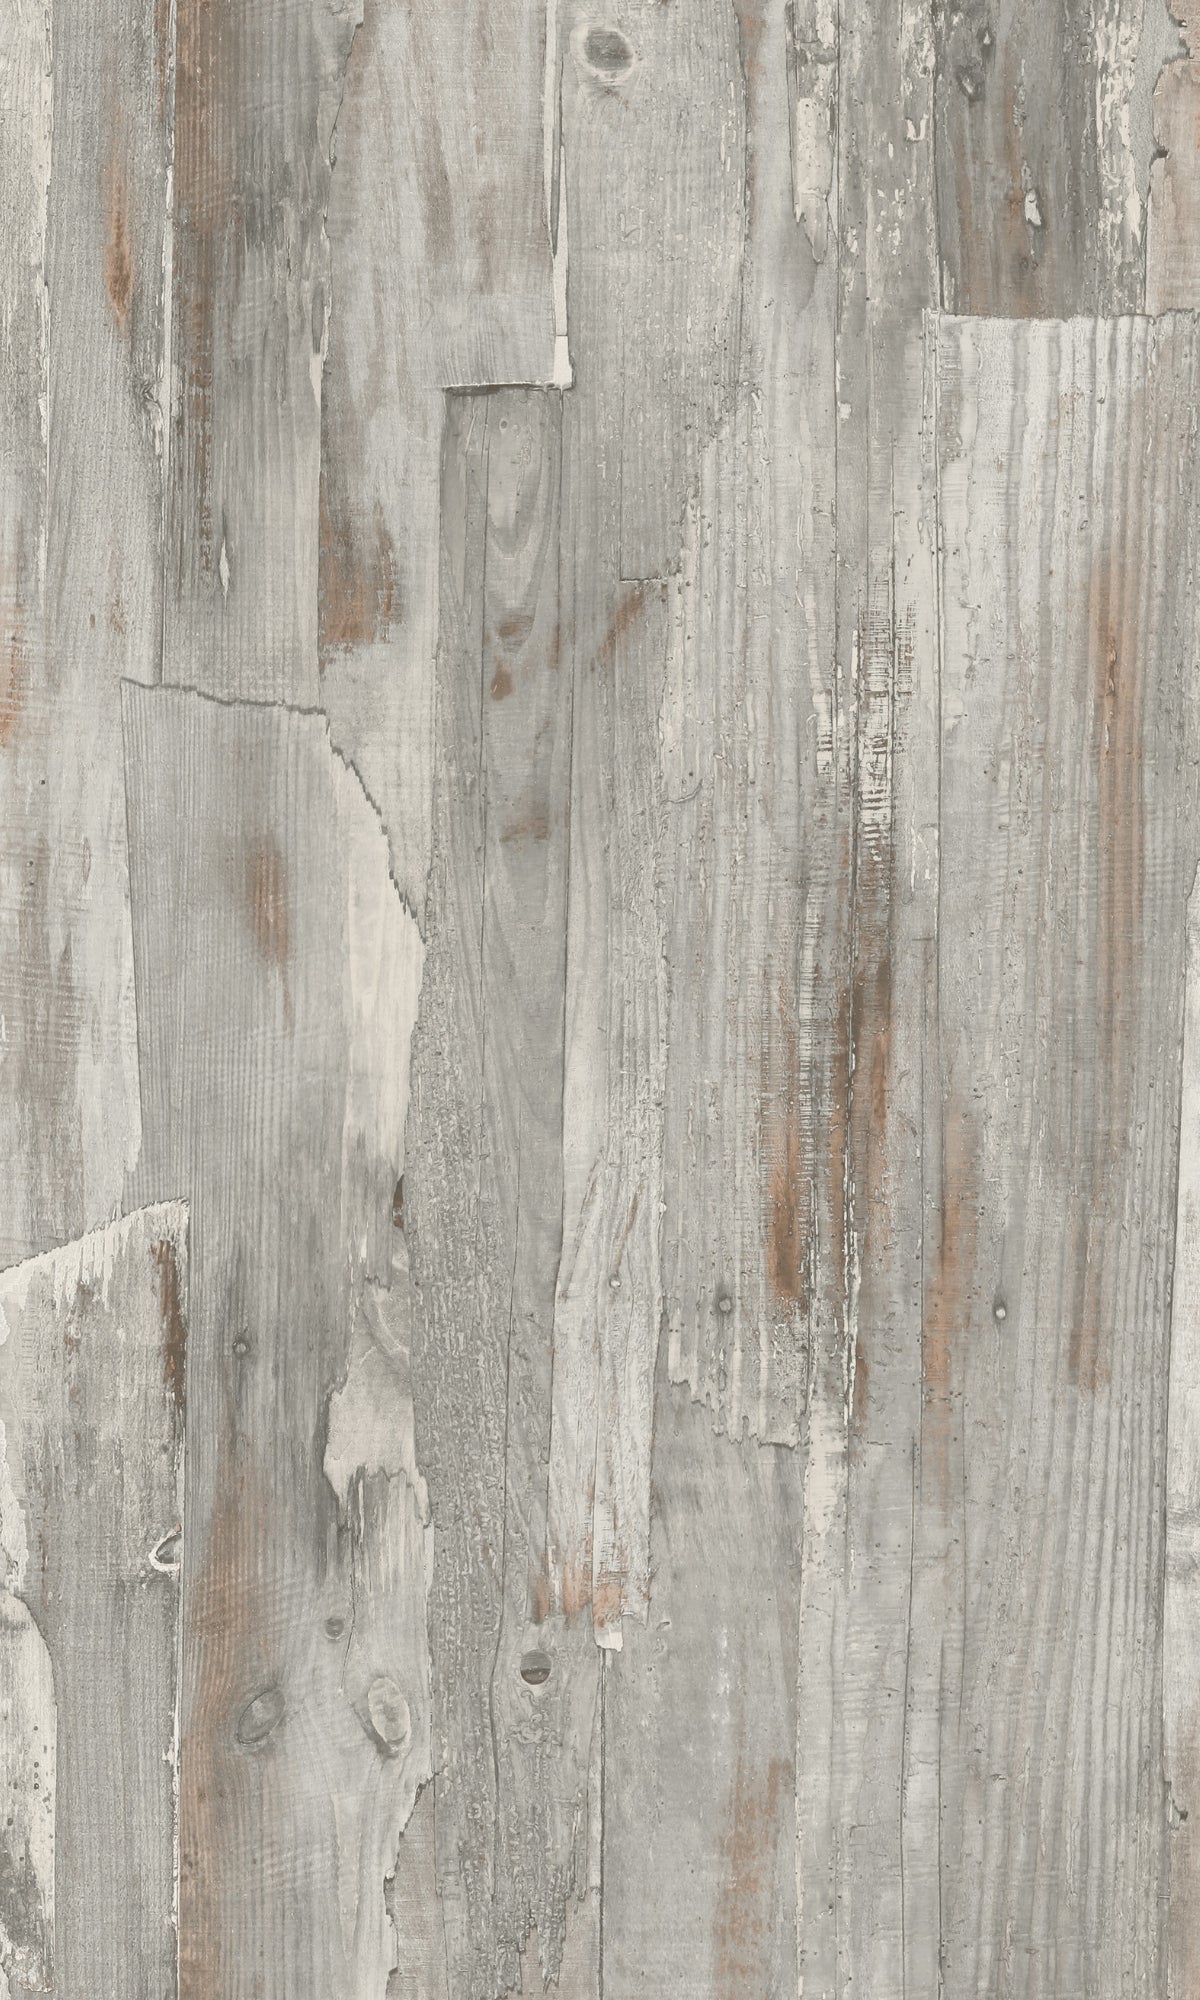 Driftwood Wallpaper by Phillip Jeffries in Skipping Stone | TM Interiors